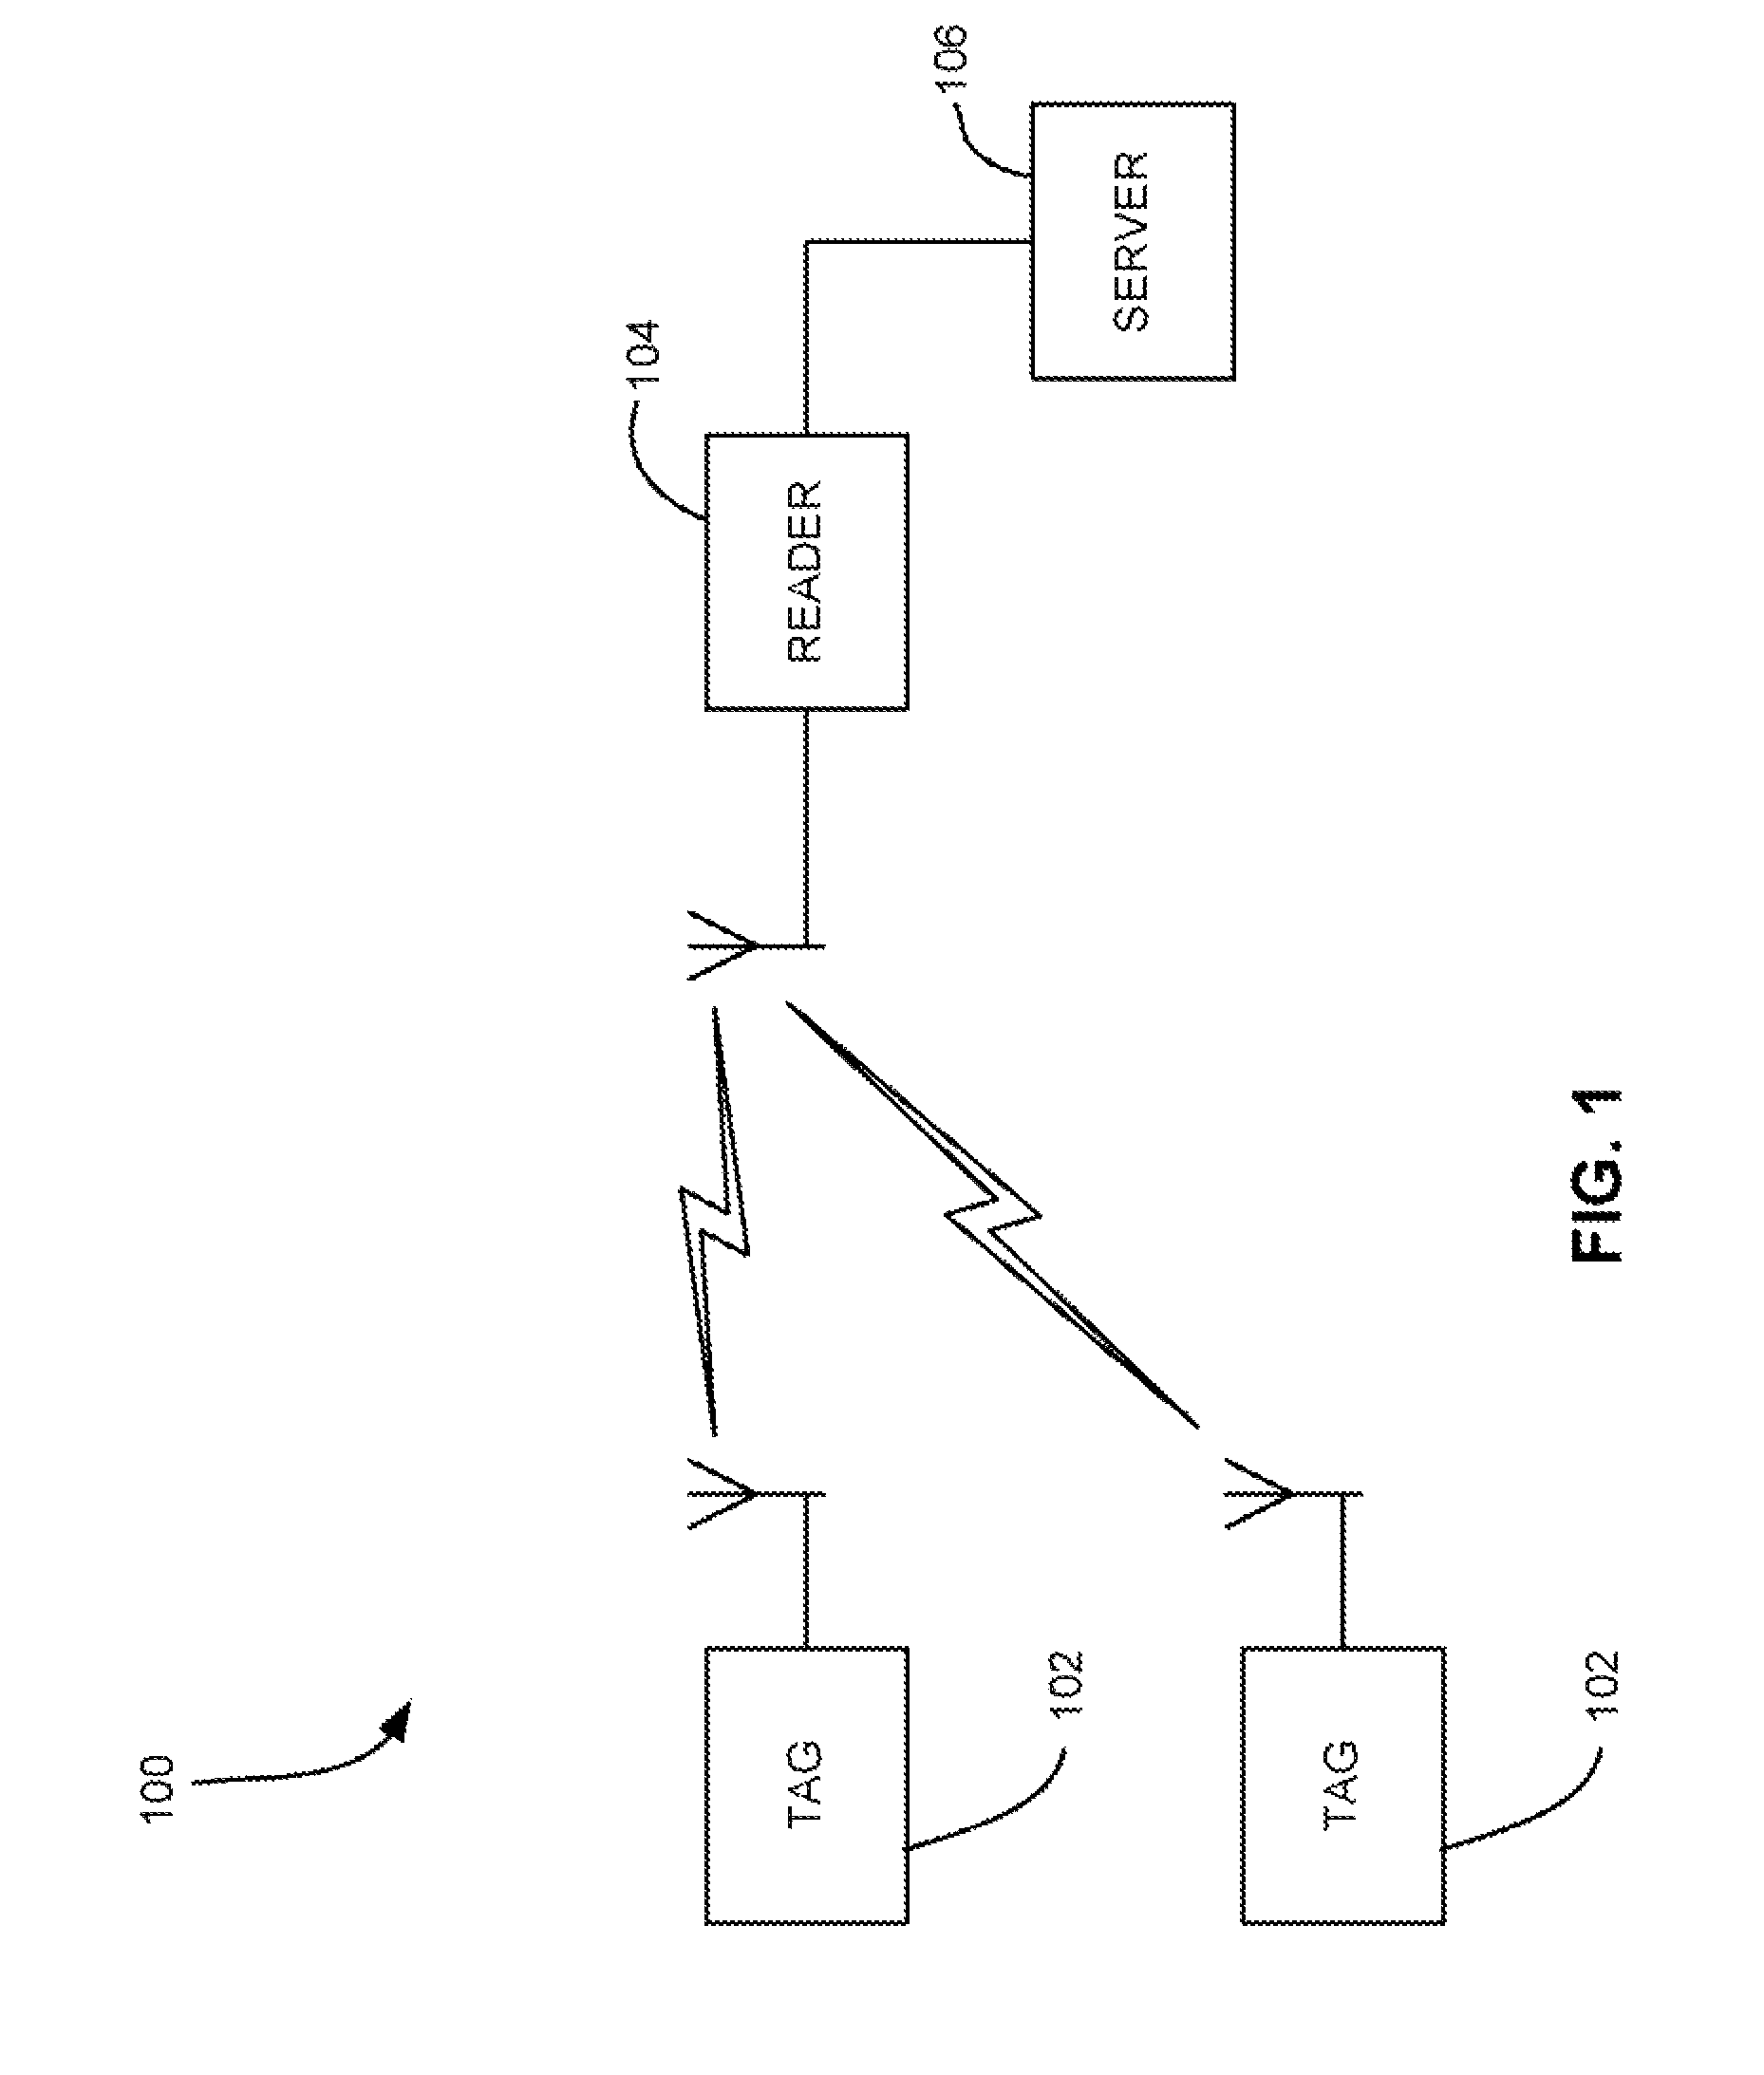 RF systems and methods for providing visual, tactile, and electronic indicators of an alarm condition